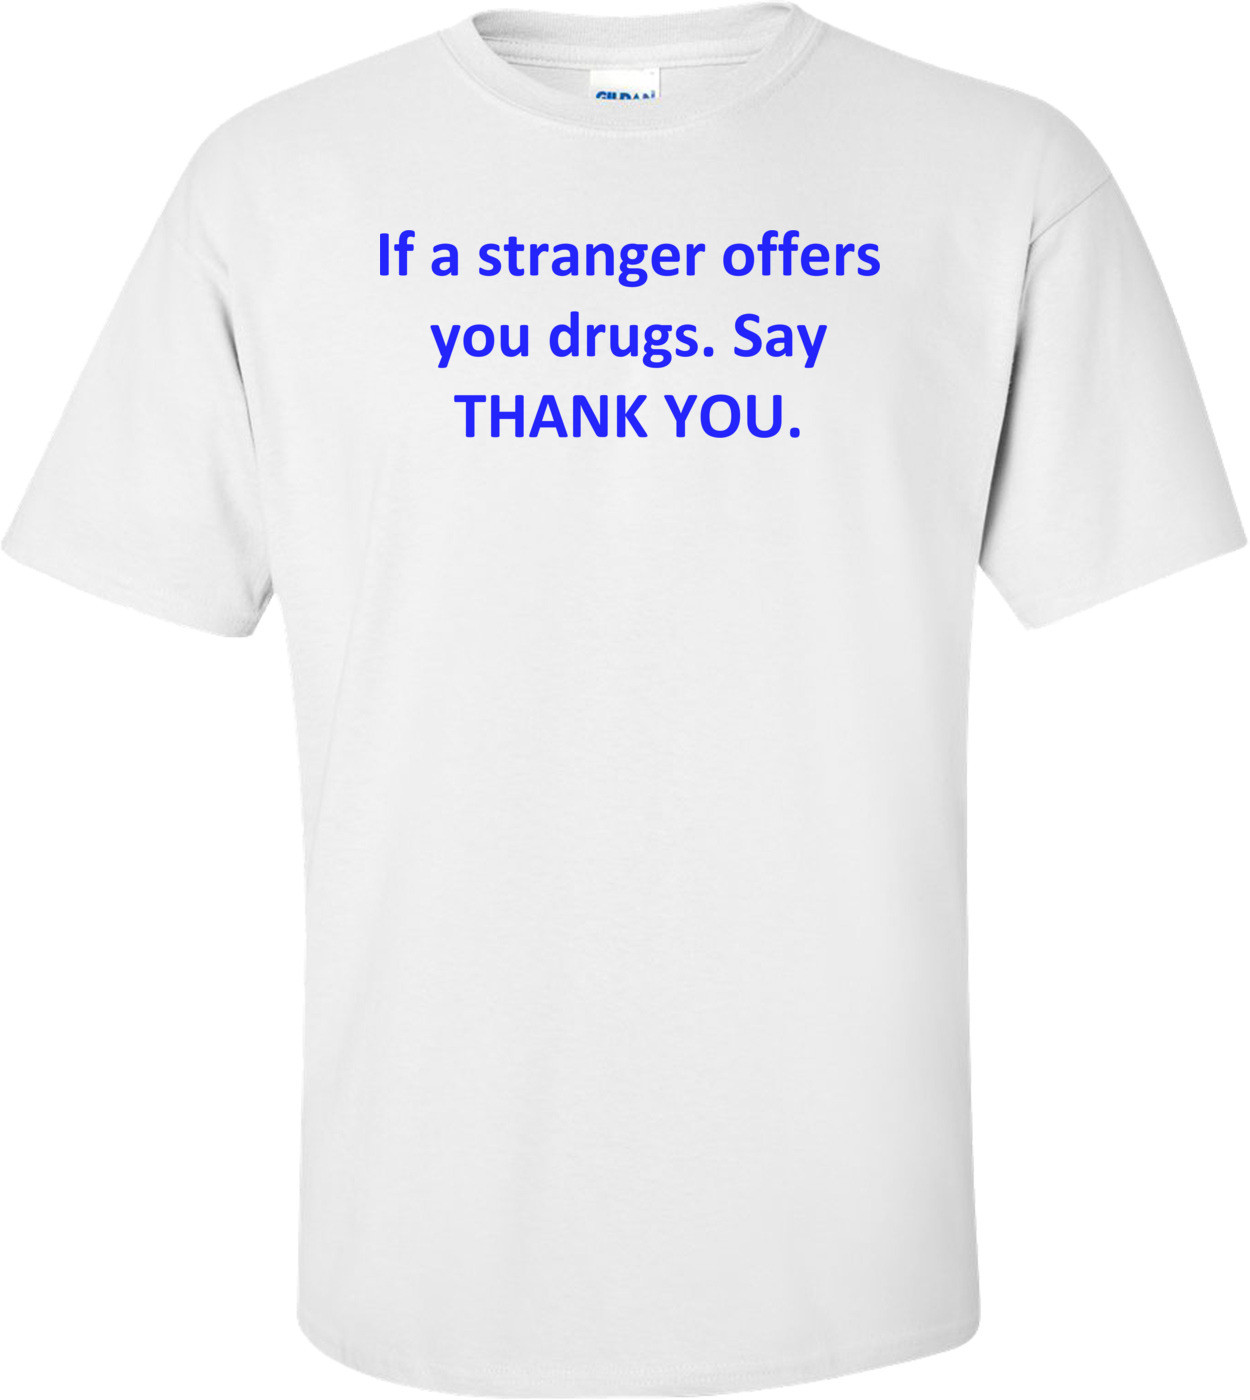 If a stranger offers you drugs. Say THANK YOU. Shirt